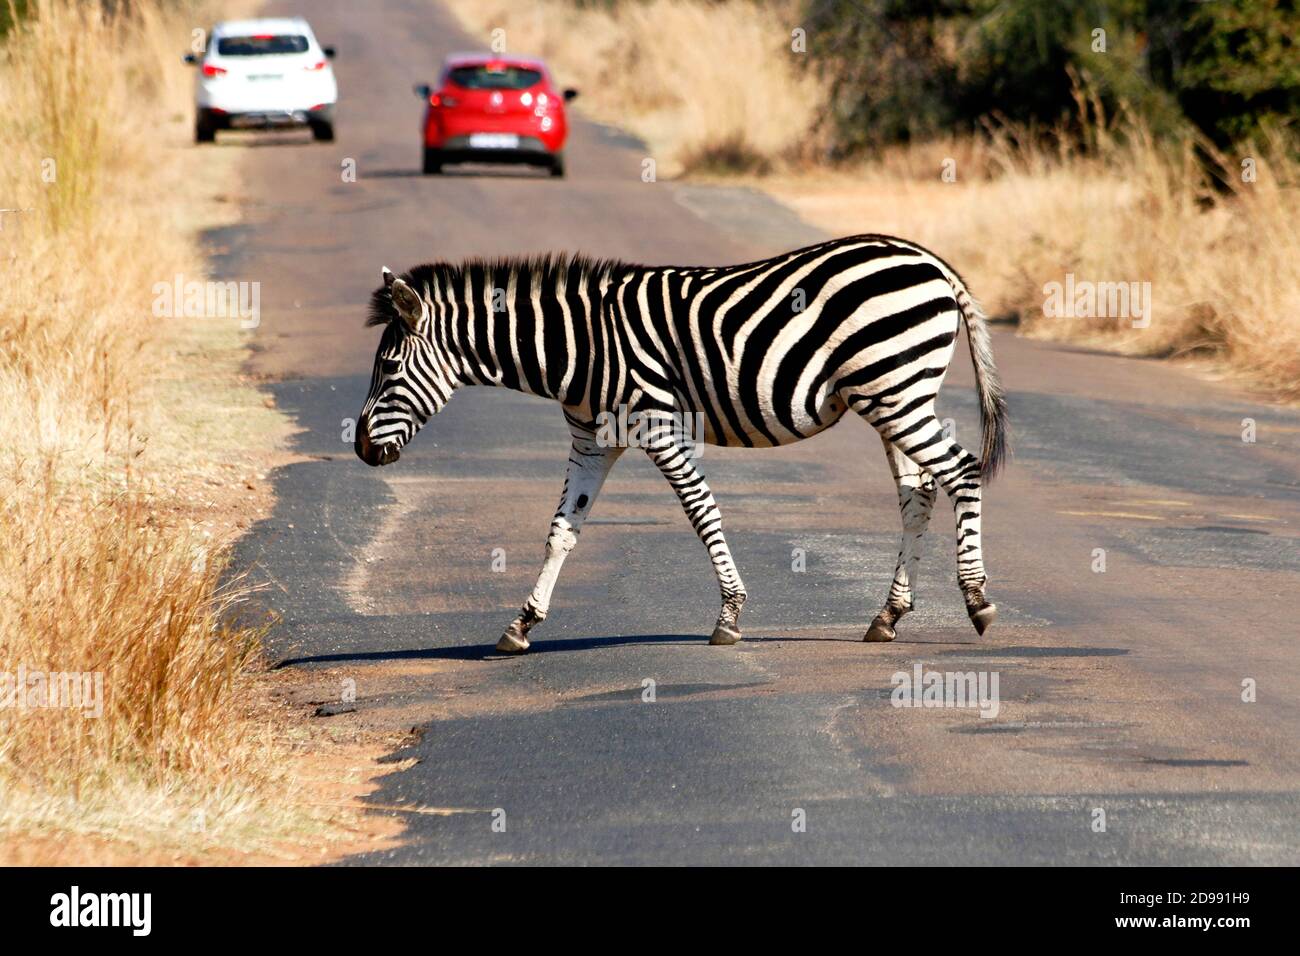 A Zibra crossing the road. Zimbabwe is mostly grassland, but its mountains give way to tropical and hardwood forests. Zimbabwe supports the second largest population of elephants, important and growing populations of lion and wild dogs, and was once the agricultural breadbasket in Africa. The prominent wild fauna includes African buffalo, African bush elephant, black rhinoceros, southern giraffe, African leopard, lion, plains zebra, and several antelope species. Zimbabwe. Stock Photo